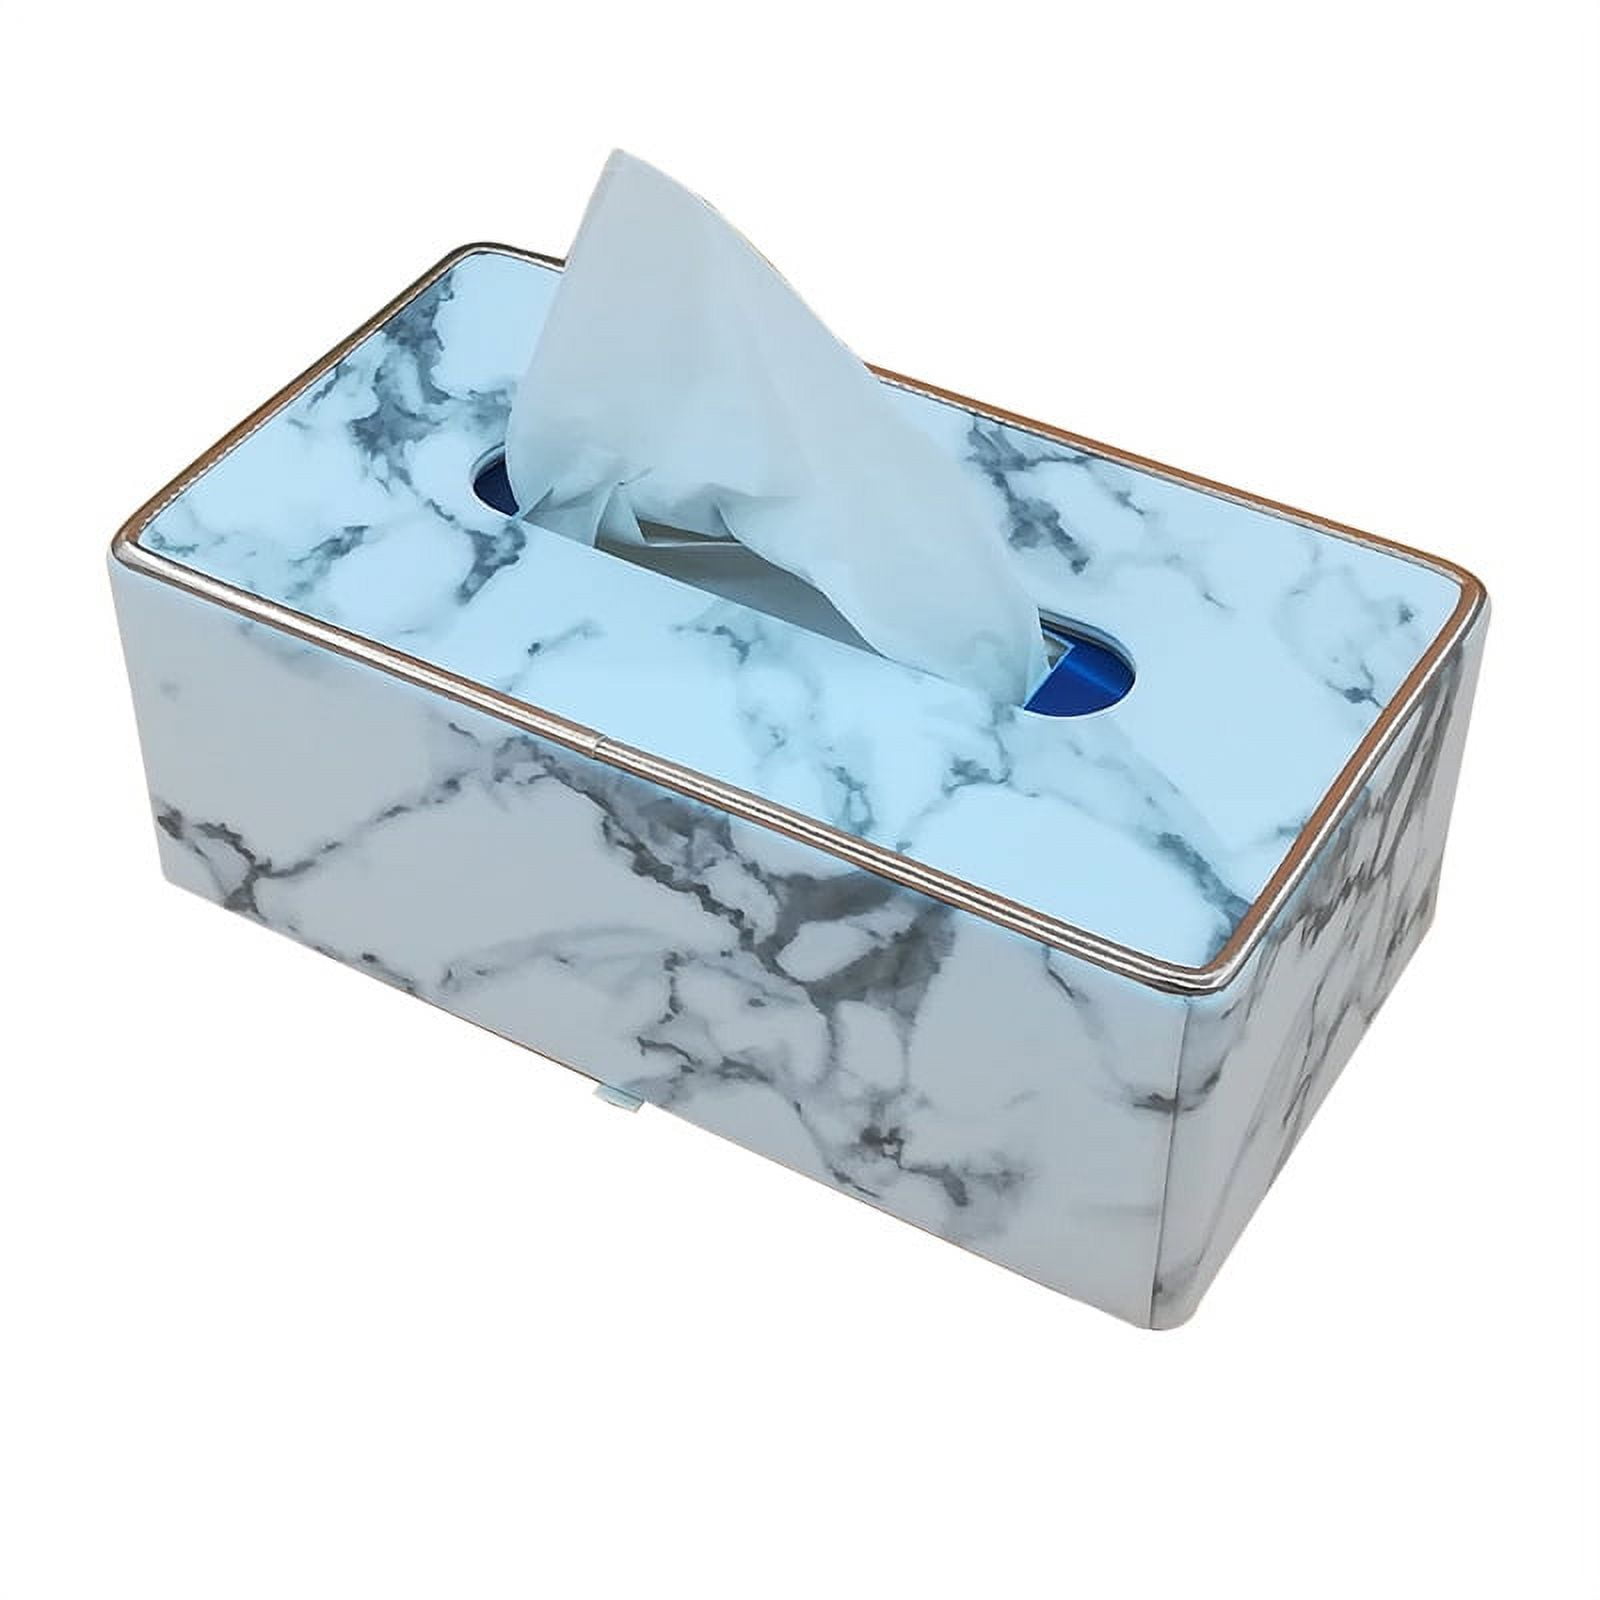  Bolt Blue Tissue Box Holder,Tissue Box Cover Rectangle, PU  Leather Kleenex Tissue Cube Boxes for Car Bathroom Office : Home & Kitchen